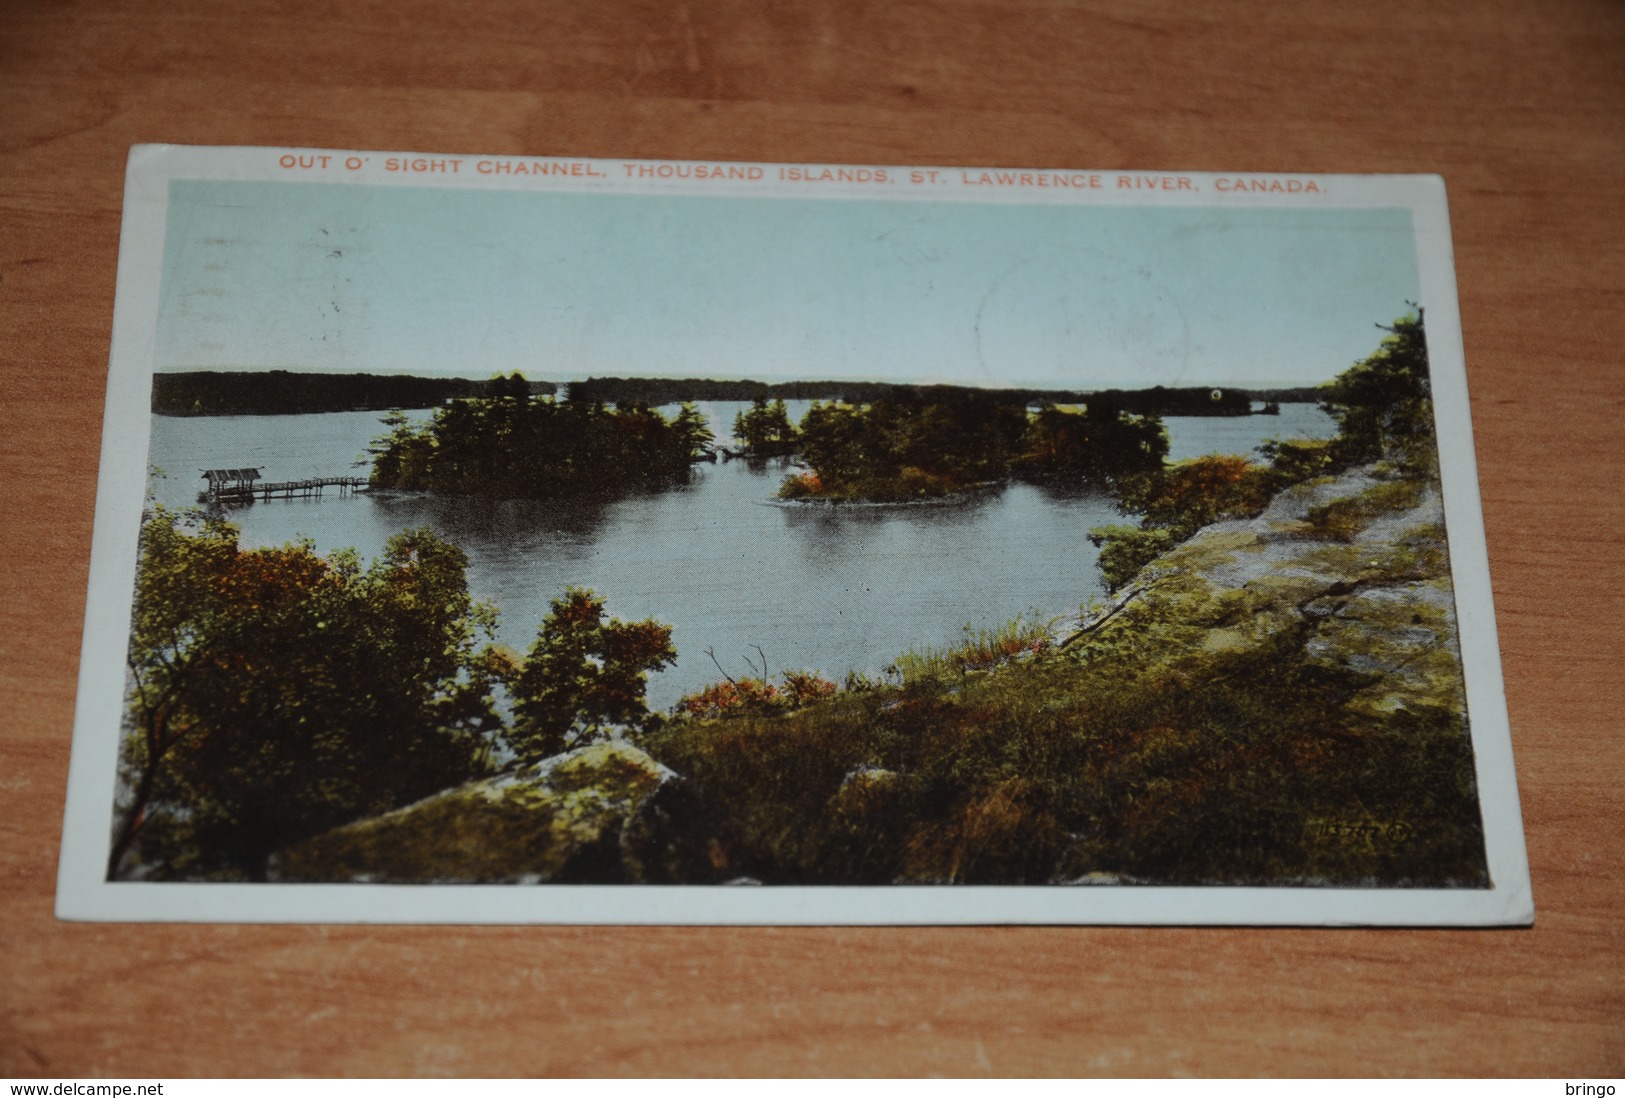 3150-         CANADA, ONTARIO, THOUSAND ISLANDS, ST. LAWRENCE RIVER - 1938 - Thousand Islands